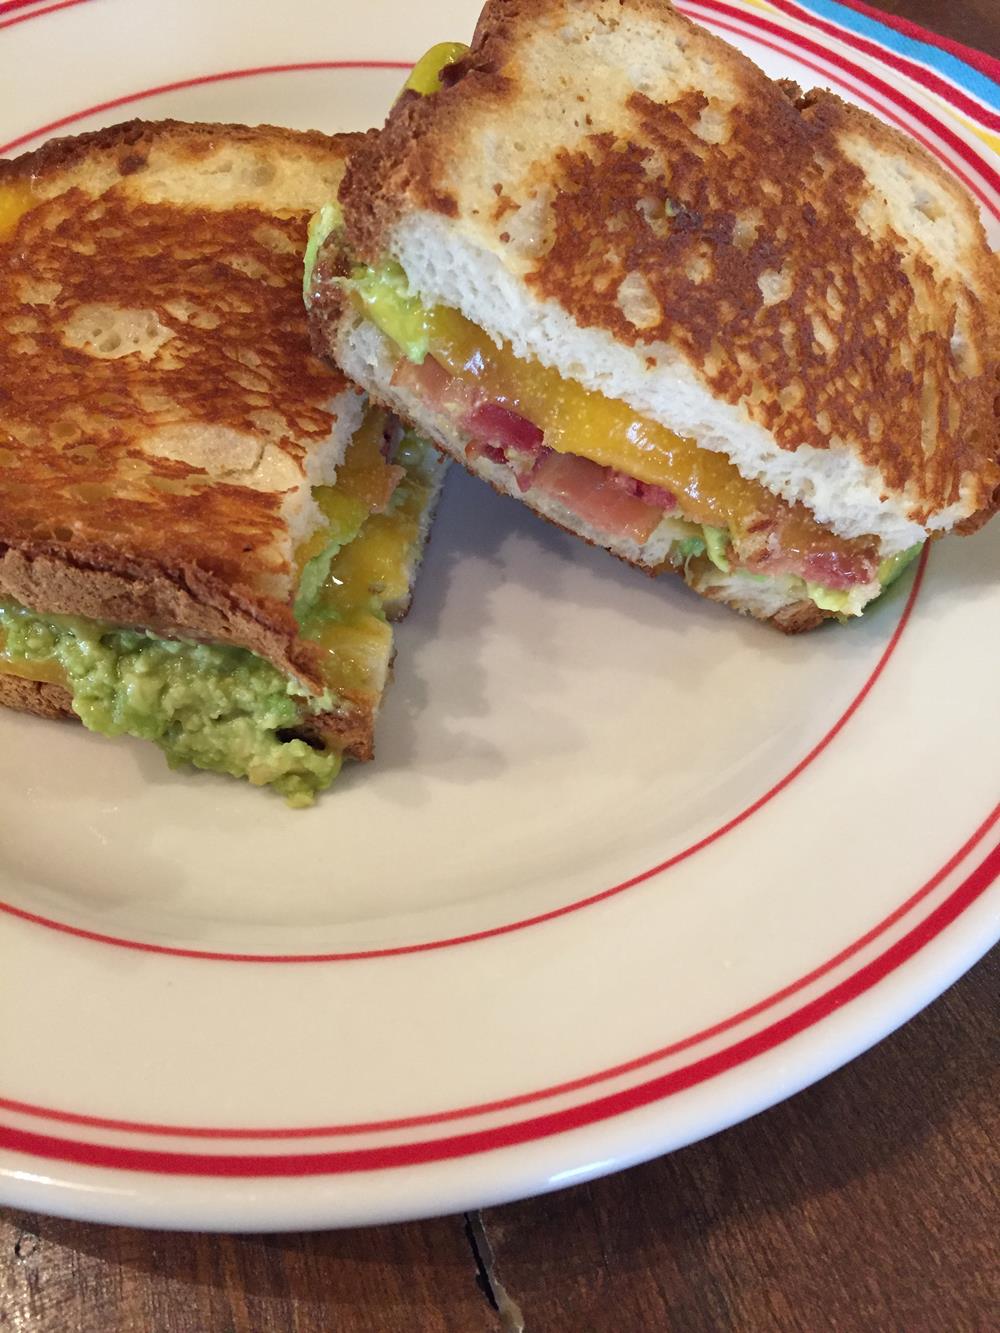 Bacon Avocado Grilled Cheese Sandwich Recipe on plate